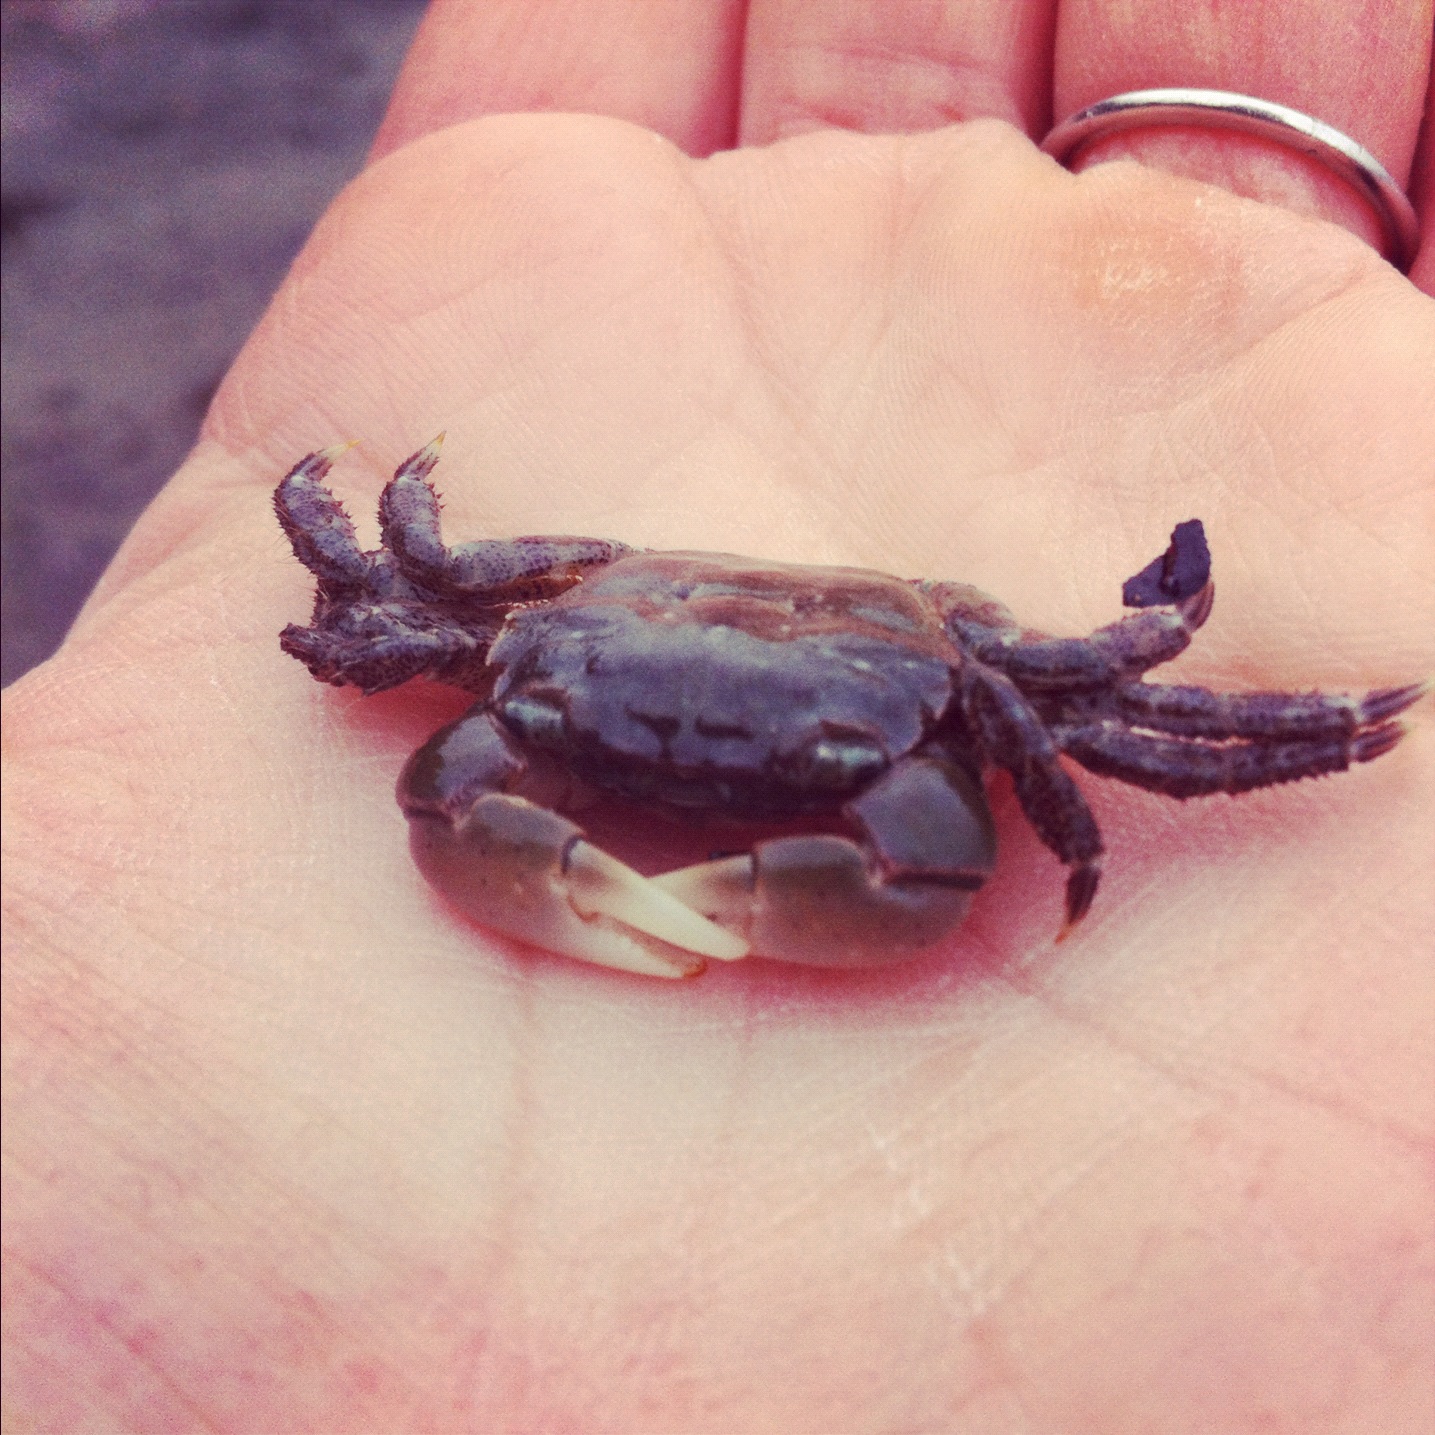 baby_dungeness_crab